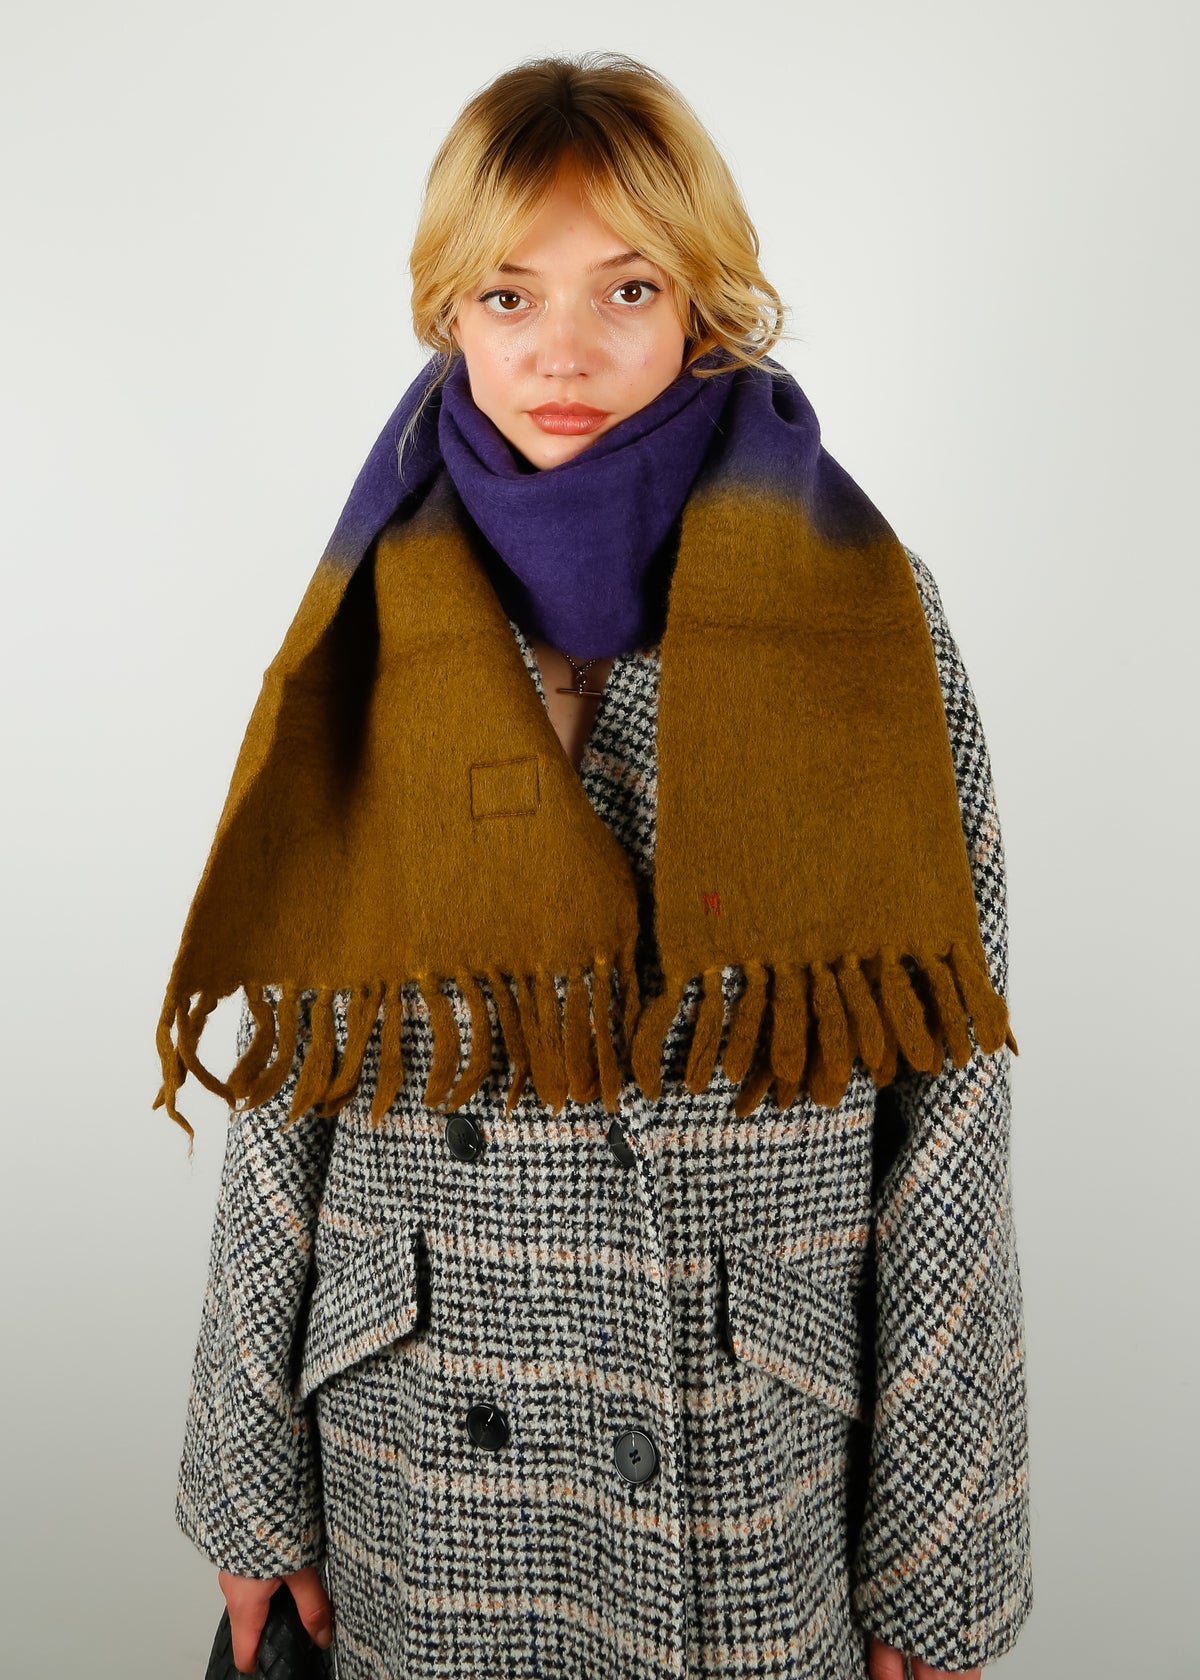 MOISMONT 698 Ombre Scarf in Coffee